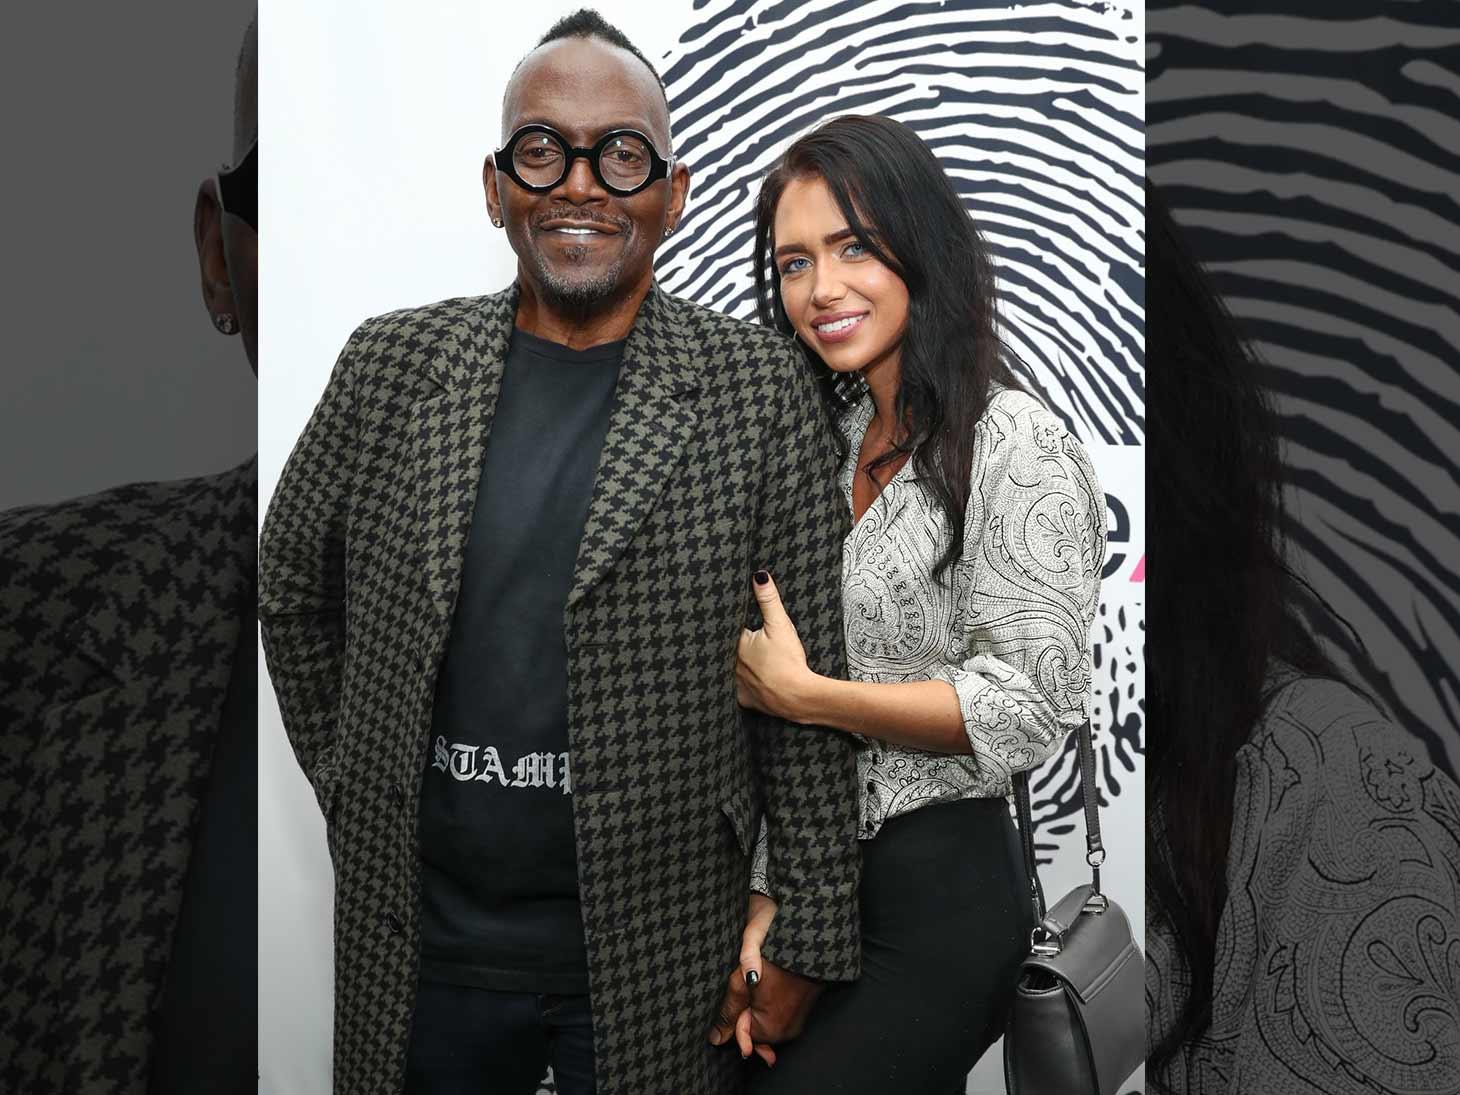 Randy Jackson Walks the Red Carpet With Apparent New Girlfriend